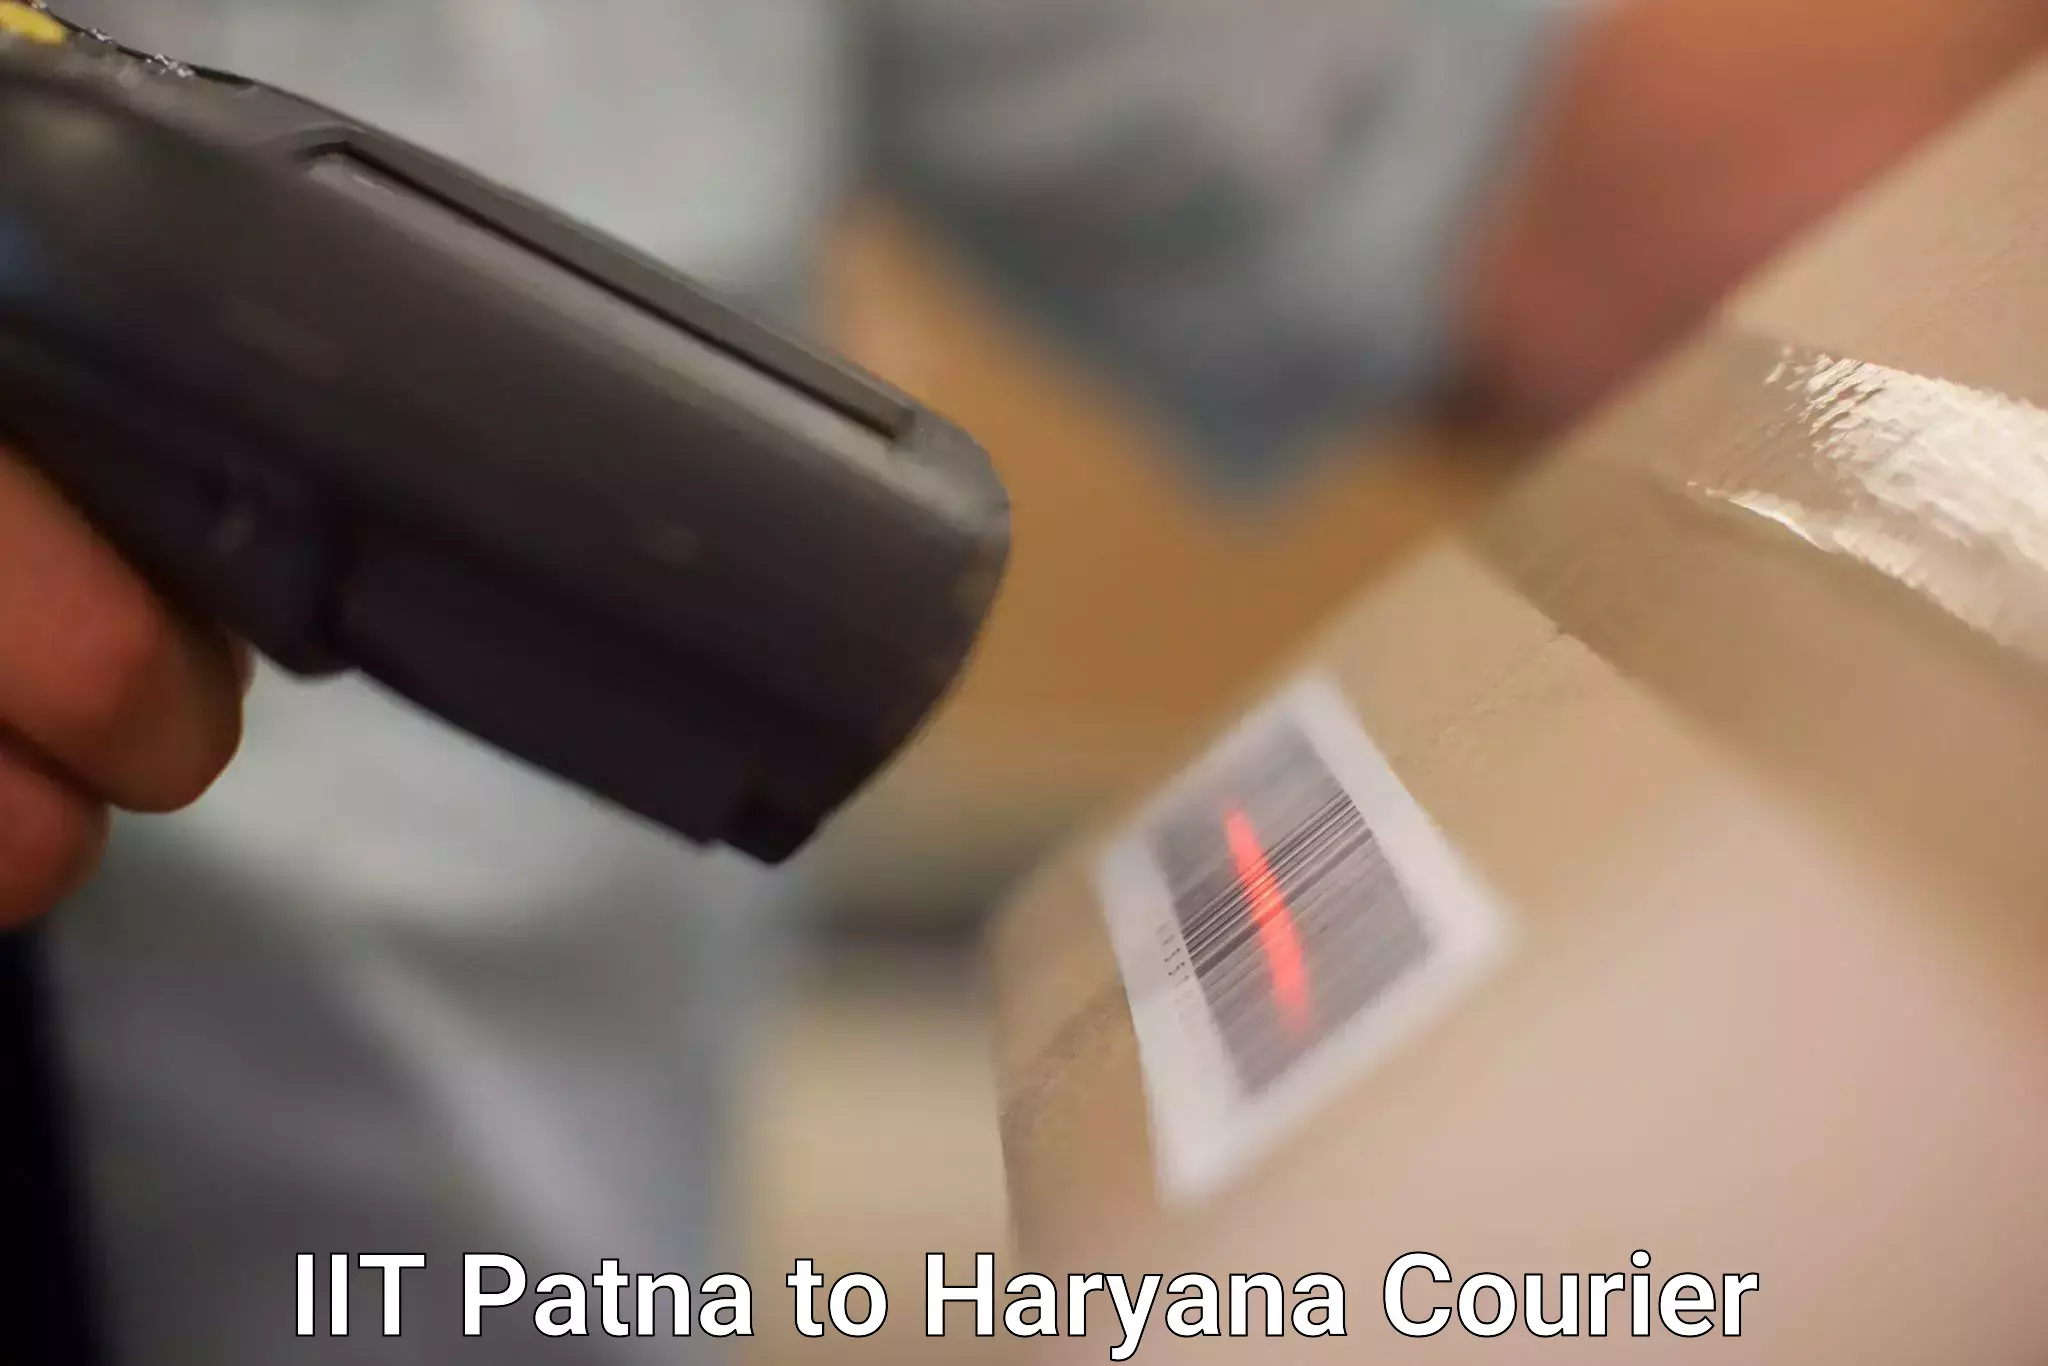 Next-day delivery options IIT Patna to Haryana